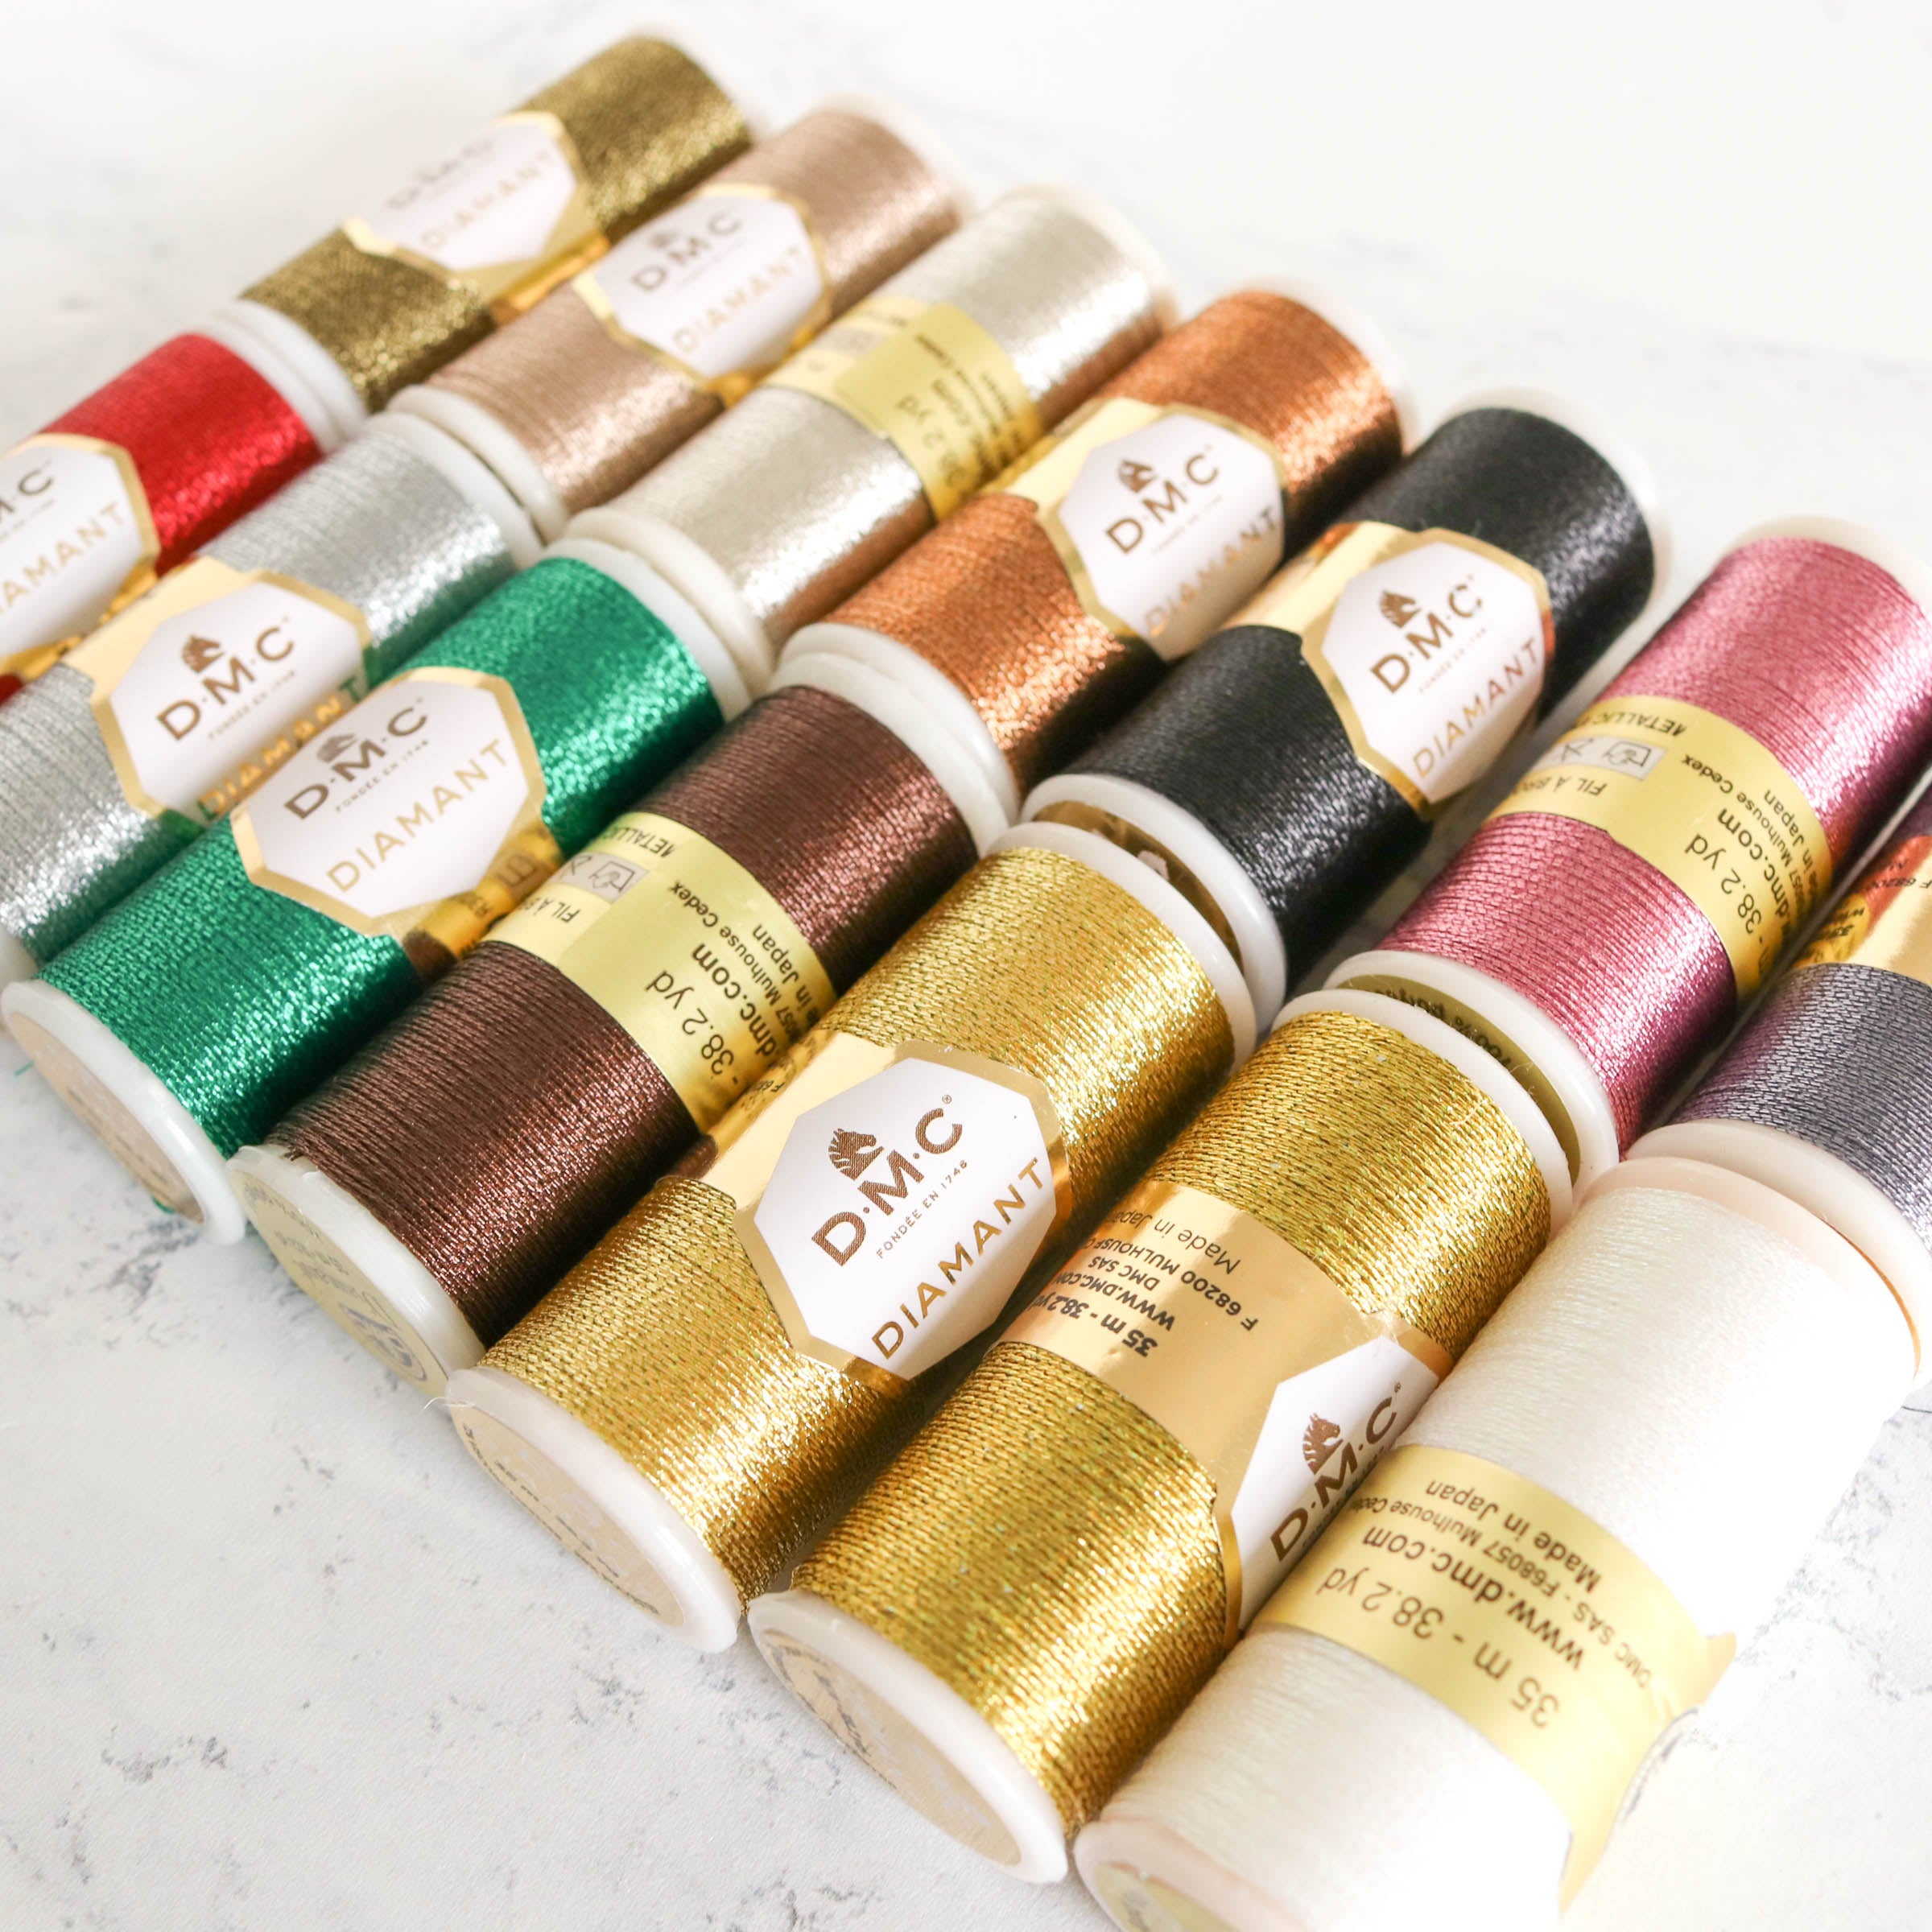 DMC Diamant Metallic Embroidery Thread - 14 Color Pack - Stitched